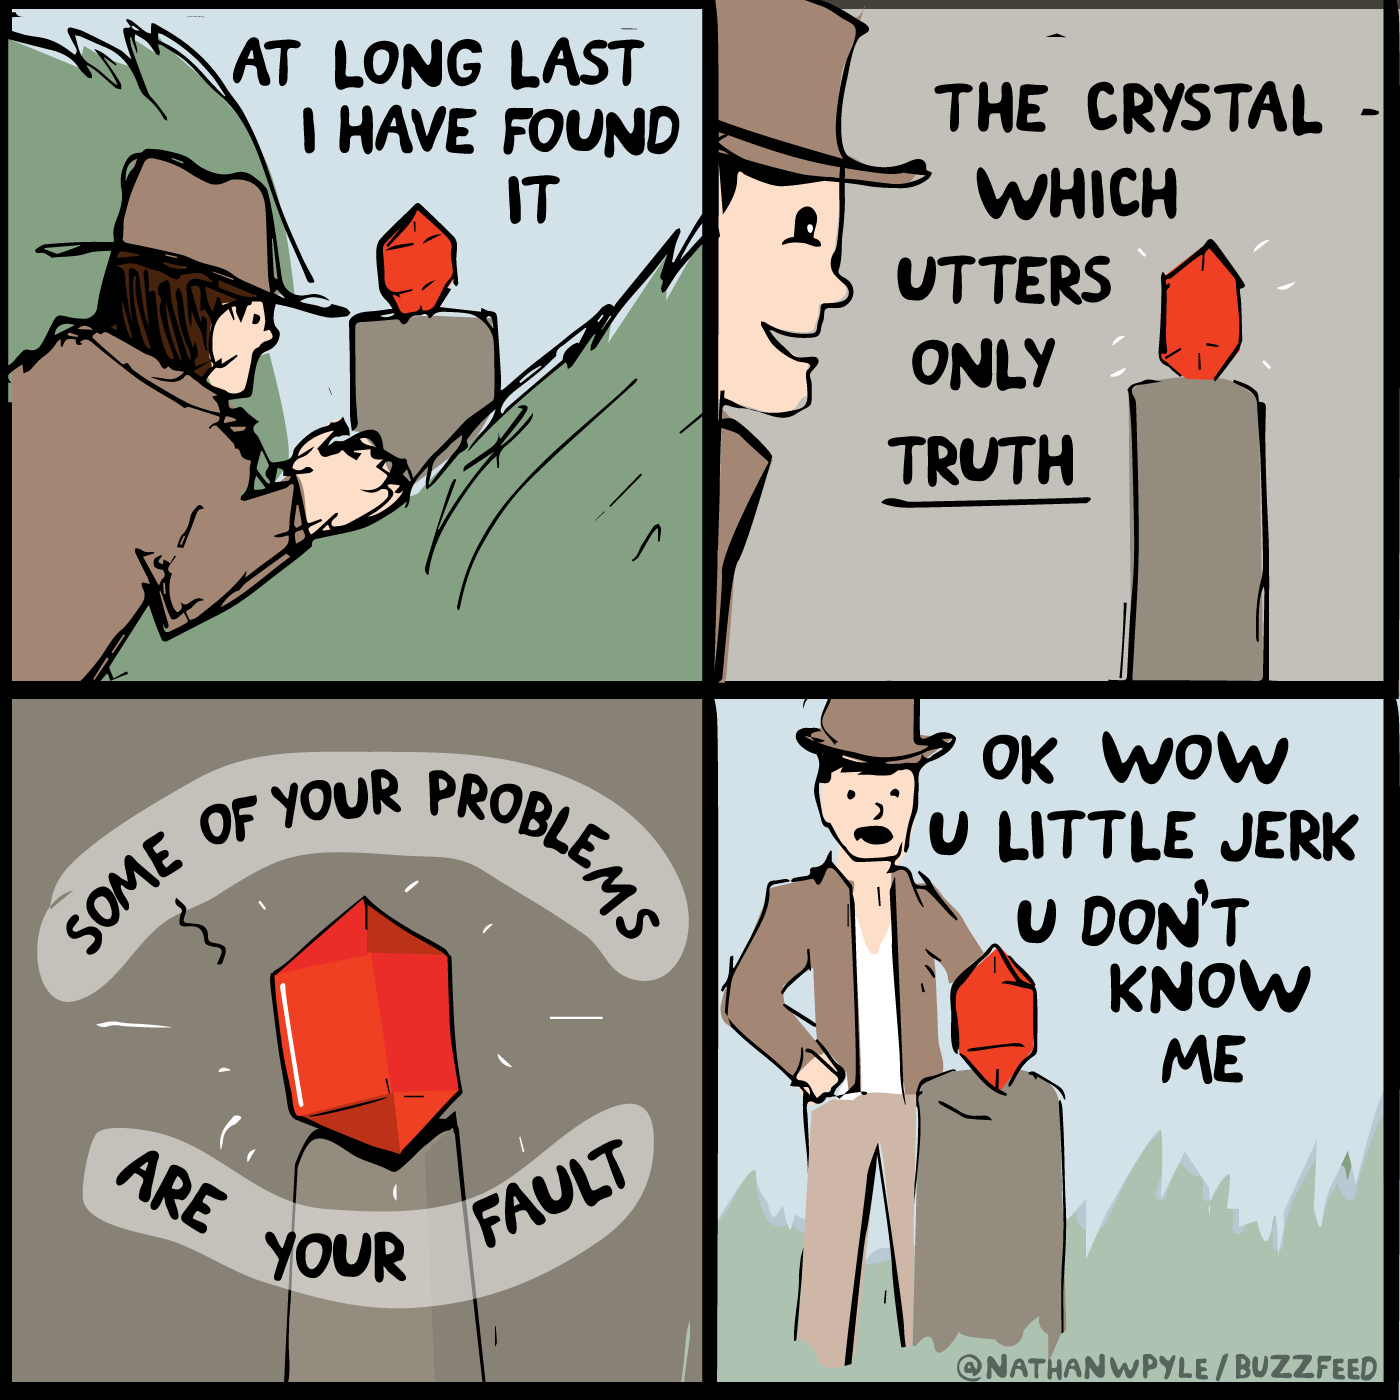 crystal of truth meme - som At Long Last I Have Found The Crystal Which Utters Only Truth Of Your Probe Oblems Some Of Ok Wow Ju Little Jerk U Don'T Know Me Are Your Fault Wpyle Buzzfeed